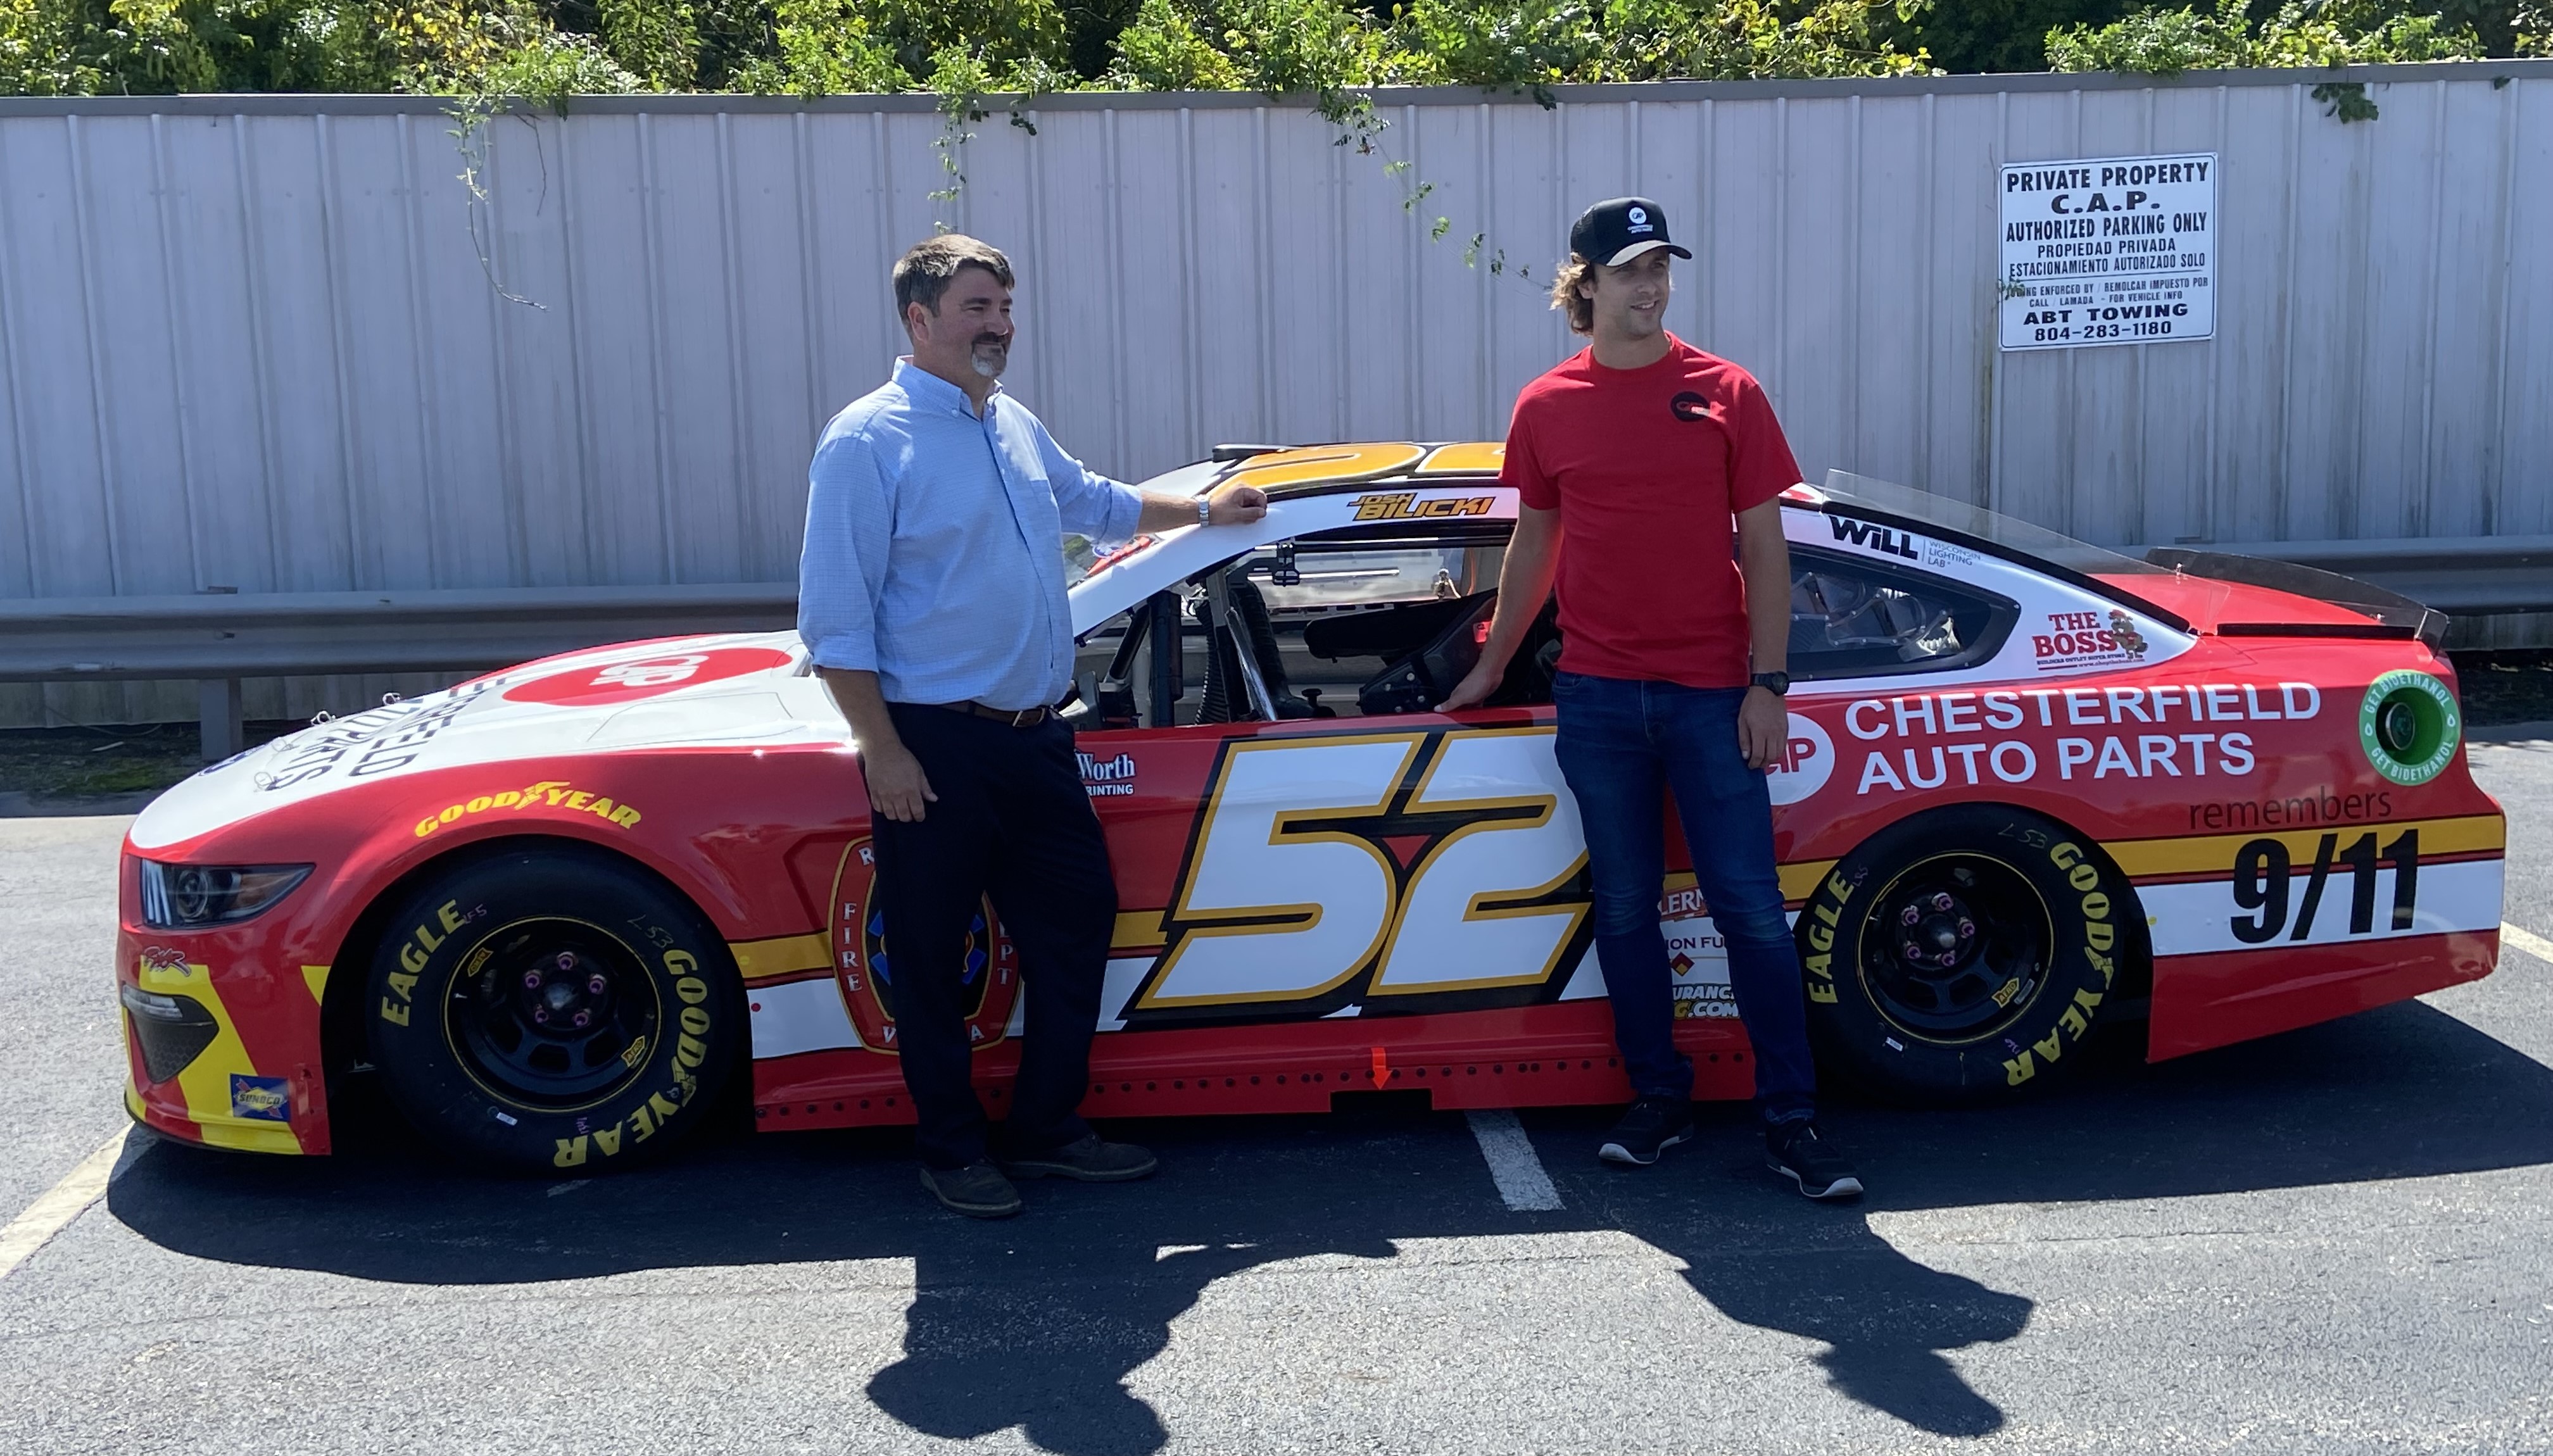 Chesterfield Auto Parts Owner Troy Webber stands with NASCAR driver Josh Bilicki in front
              of the #52 Chesterfield Auto Parts Ford Mustang